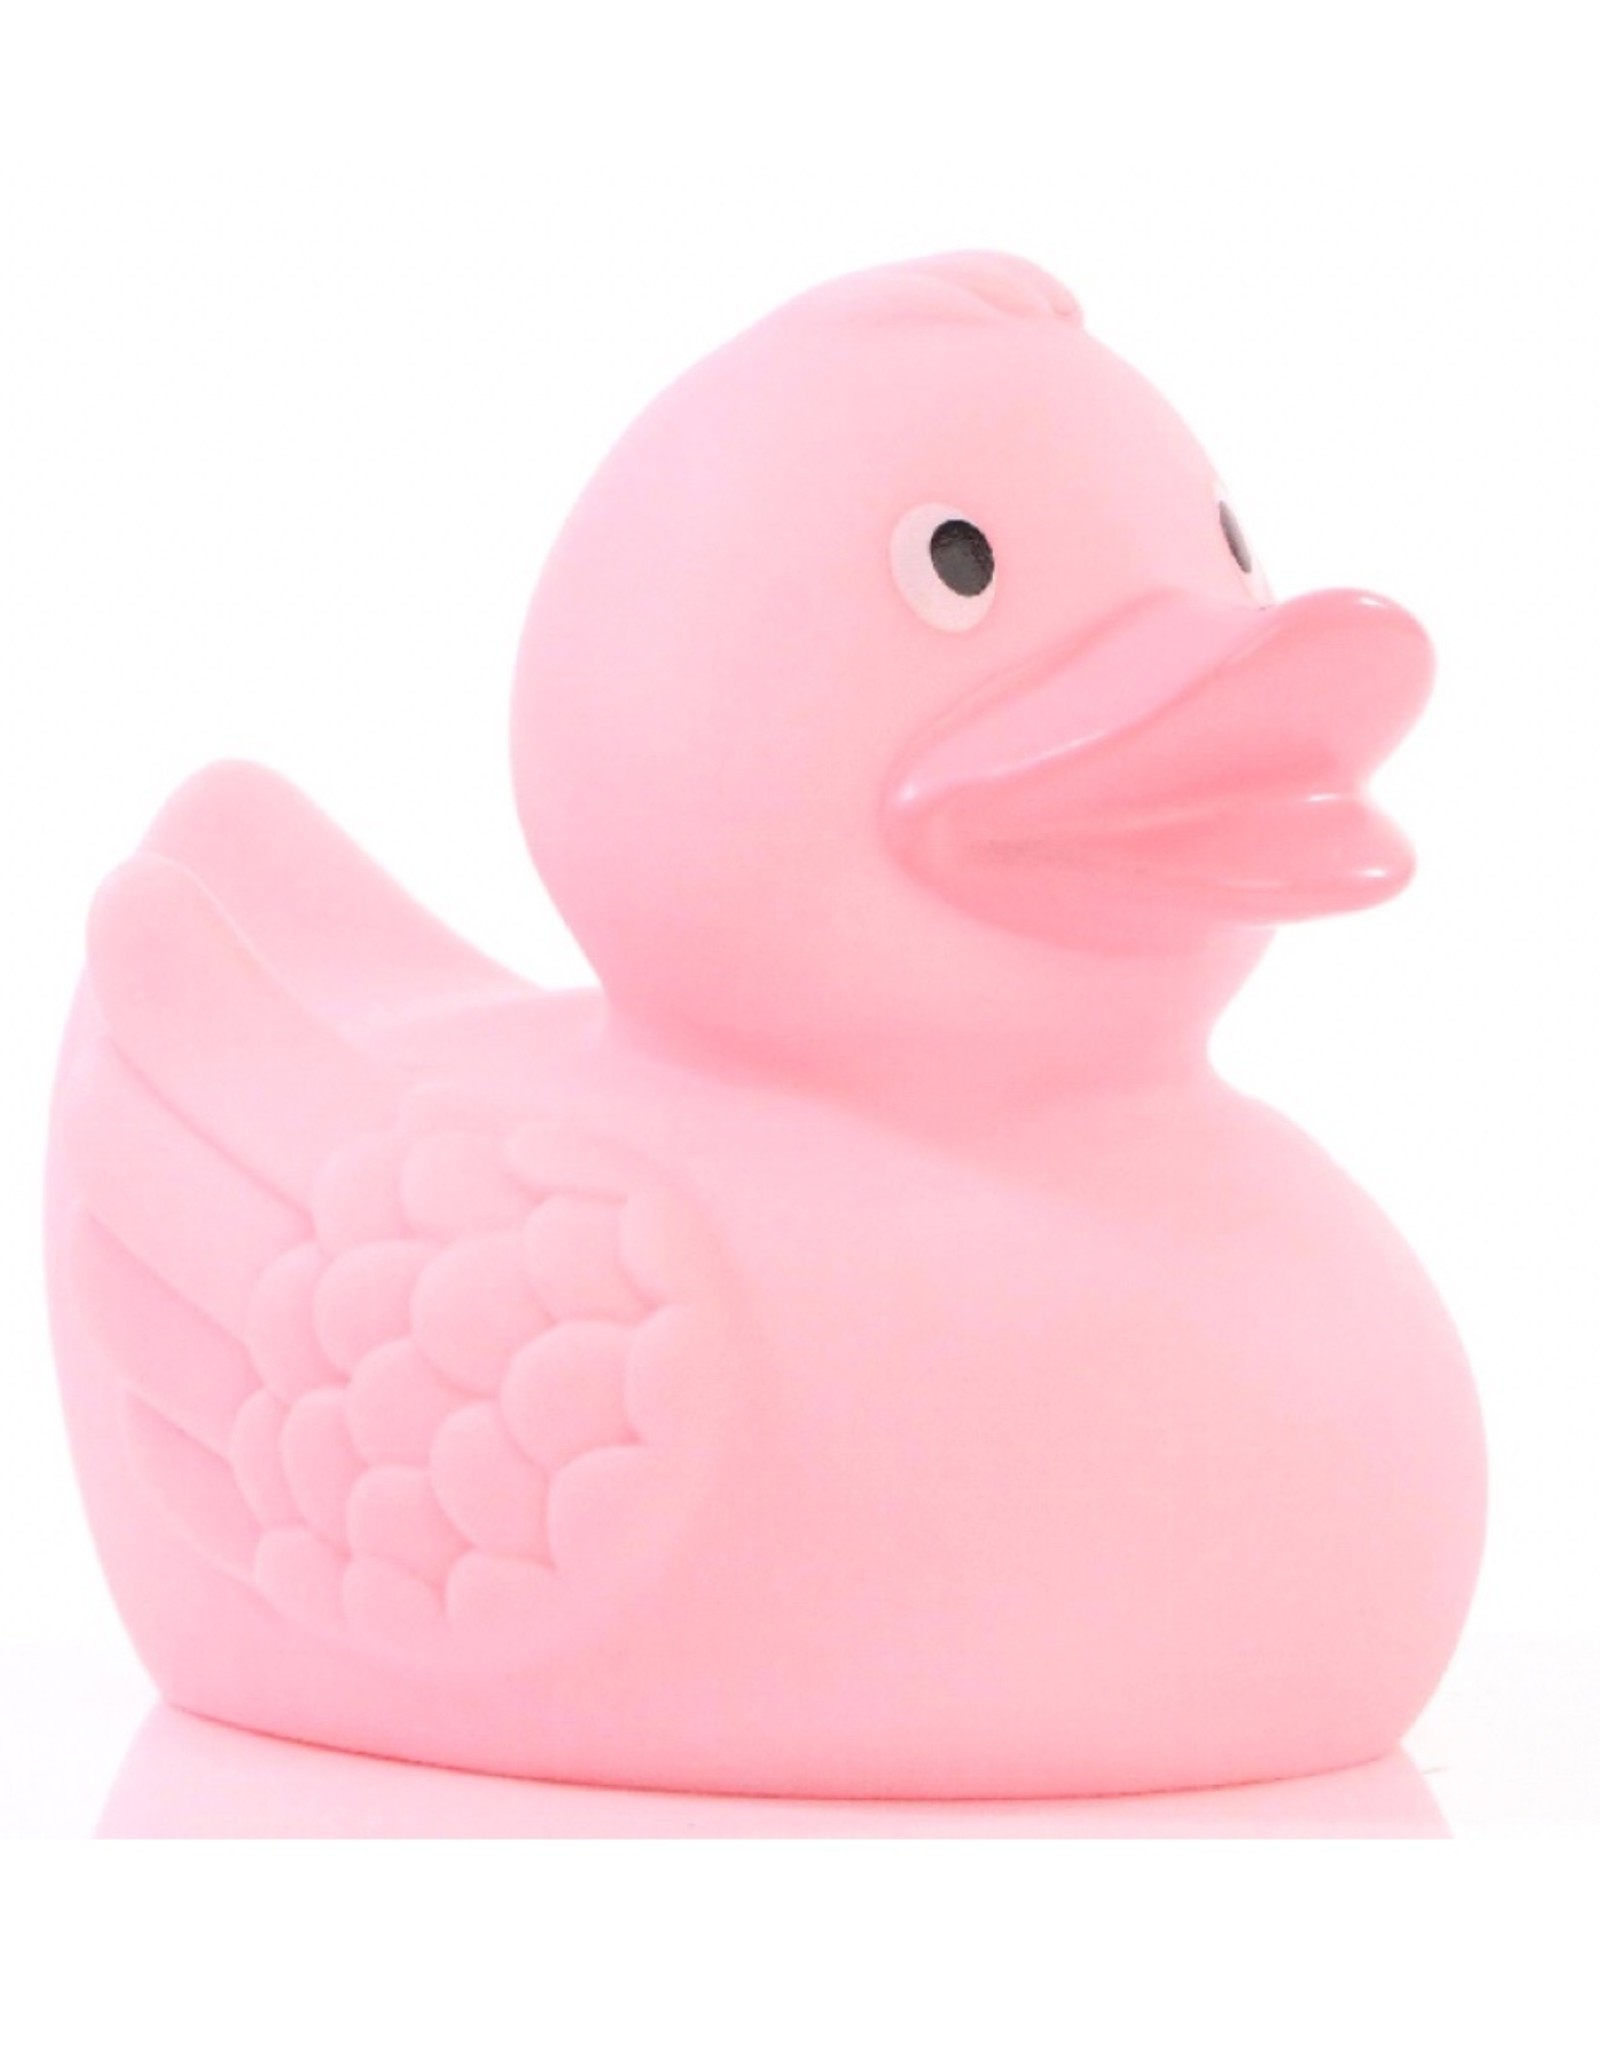 Pastel Pink Rubber Duck with Wings